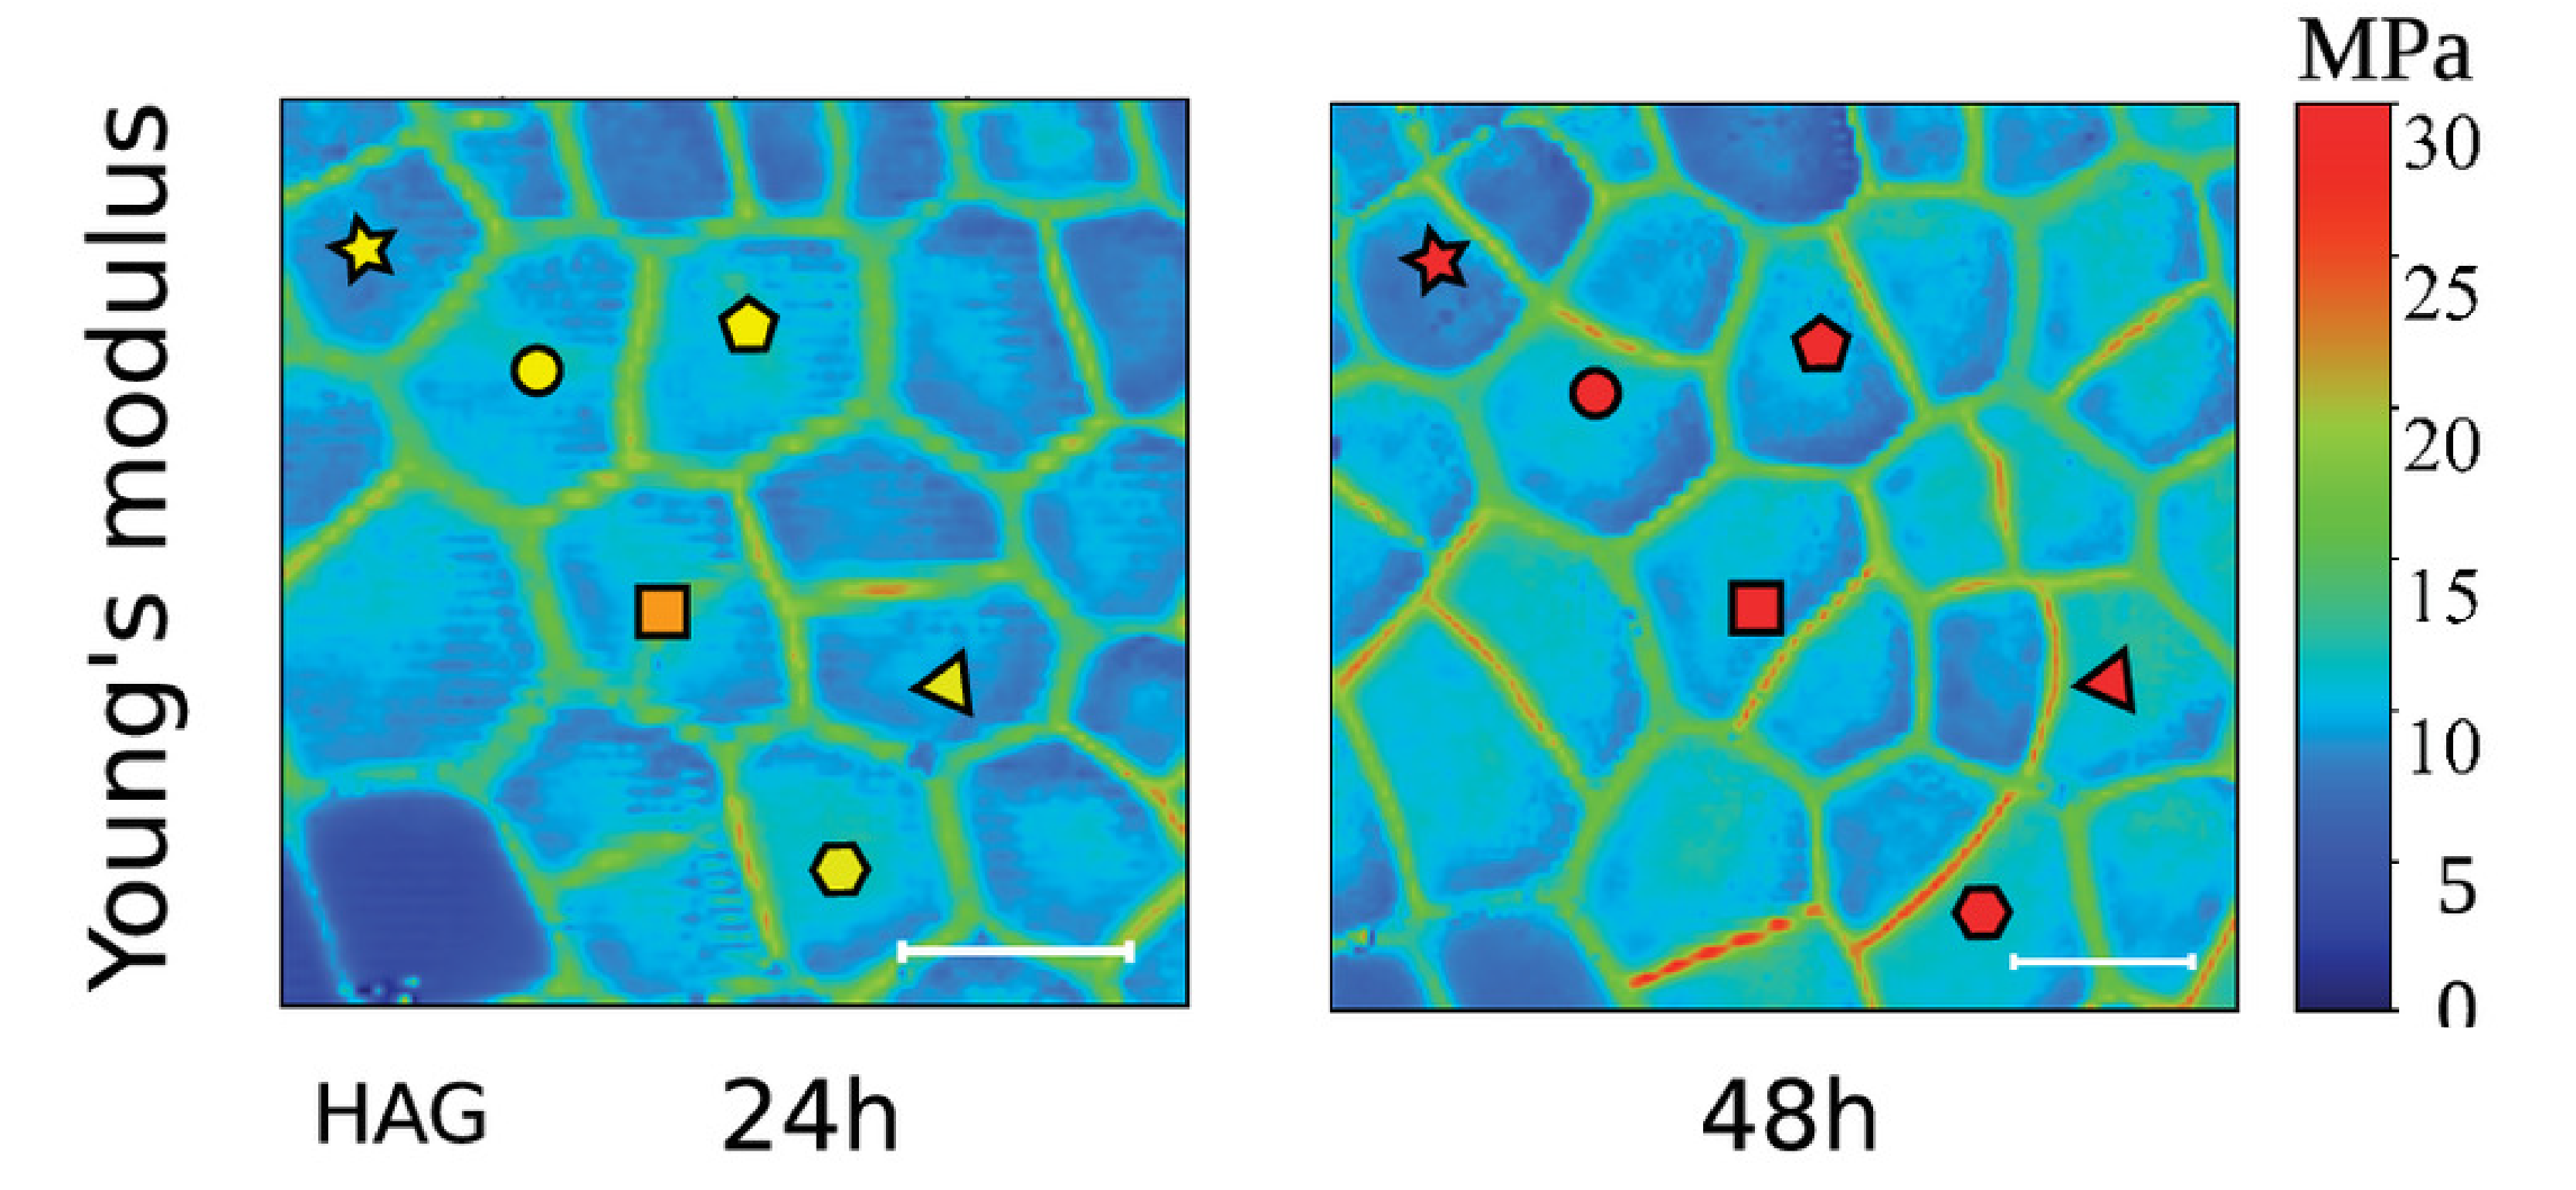 Atomic force microscopy time course on the imaged cells. Plots of the stiffness and contact point maps for the dividing cells at different HAD (24 HAD and 48 HAD) for M. polymorpha. (Scale bar, 20 m.) 